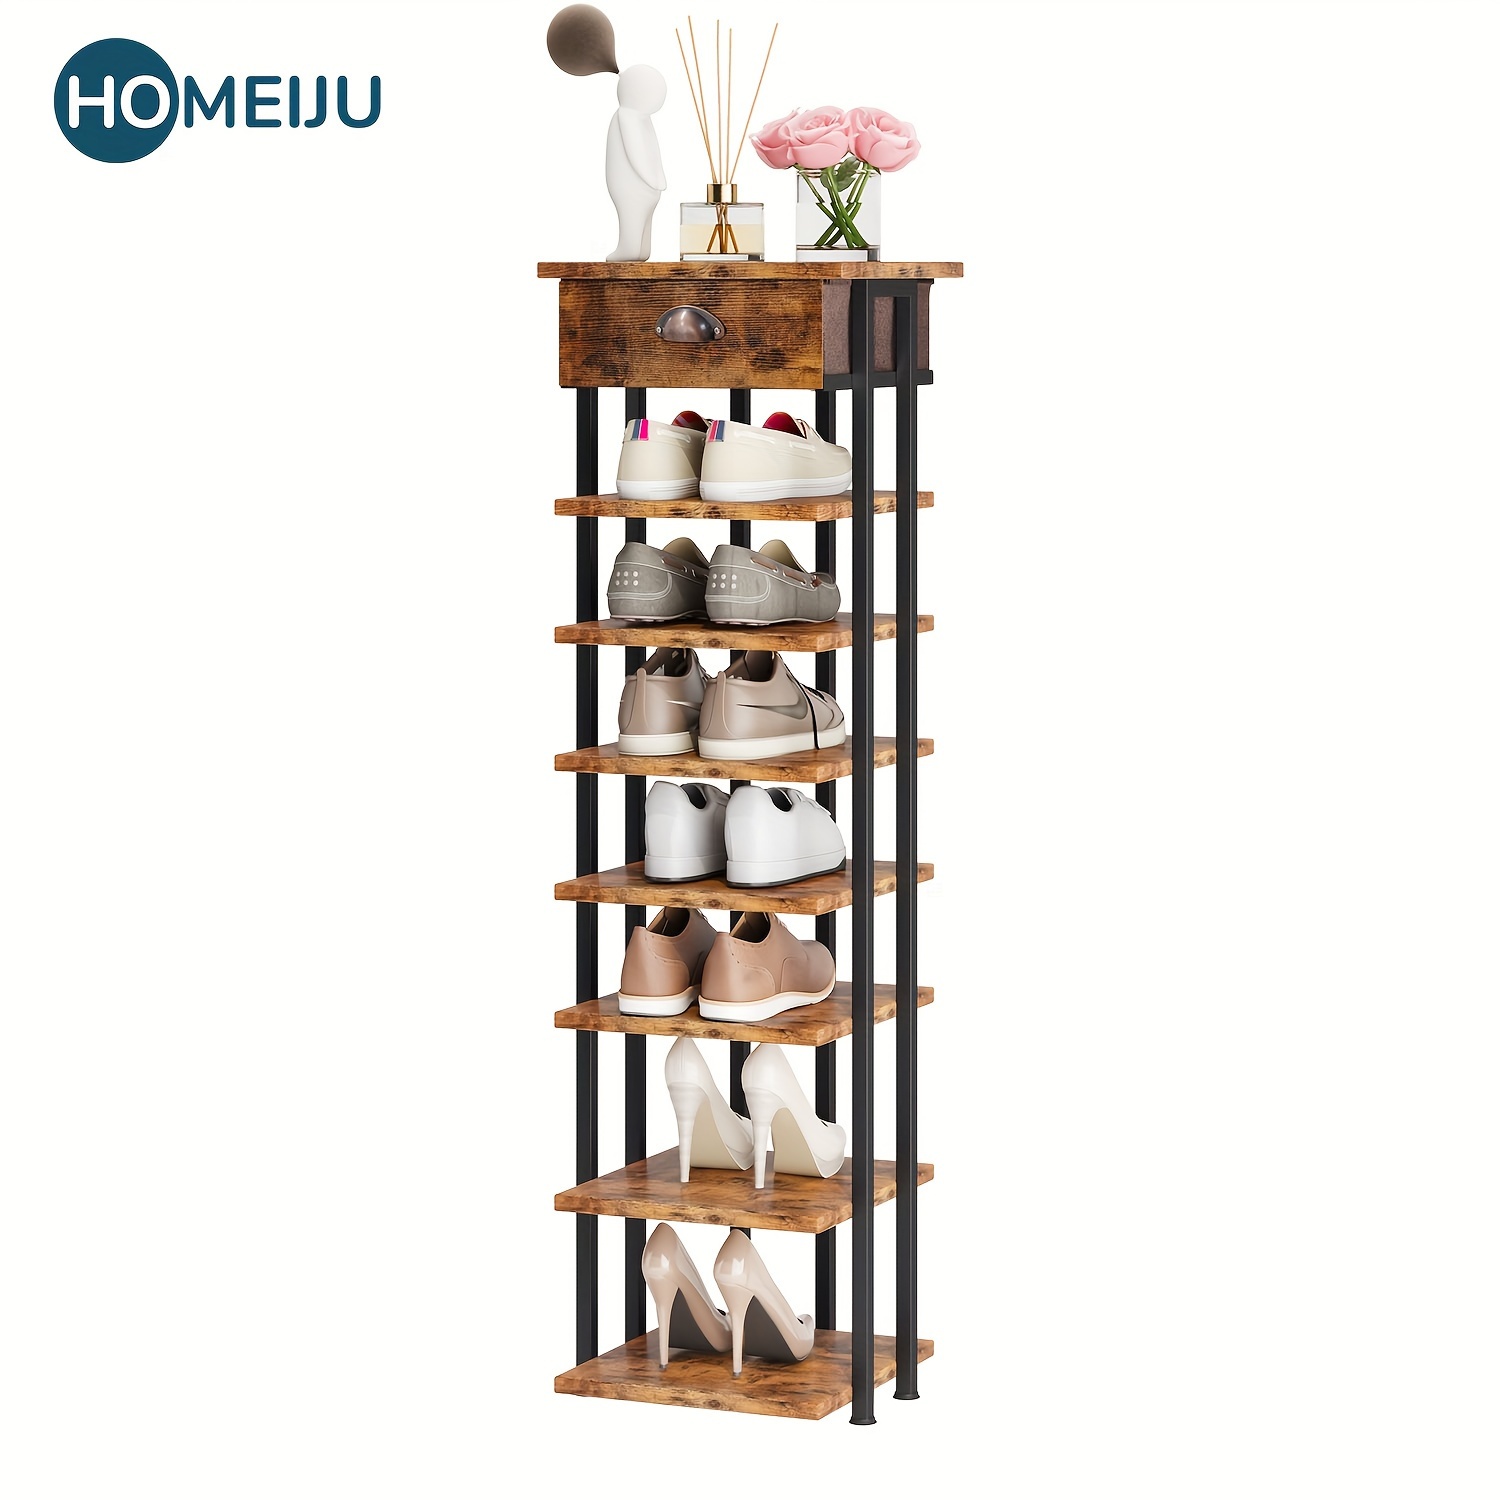 

Shoe Rack Organizer, 8-tier Vertical Shoe Rack, Wooden Shoes Rack For Entryway, Narrow Shoe Rack Shoes Storage Organizer With Wooden Top & Drawer For Entryway, Hallway, Rustic Brown